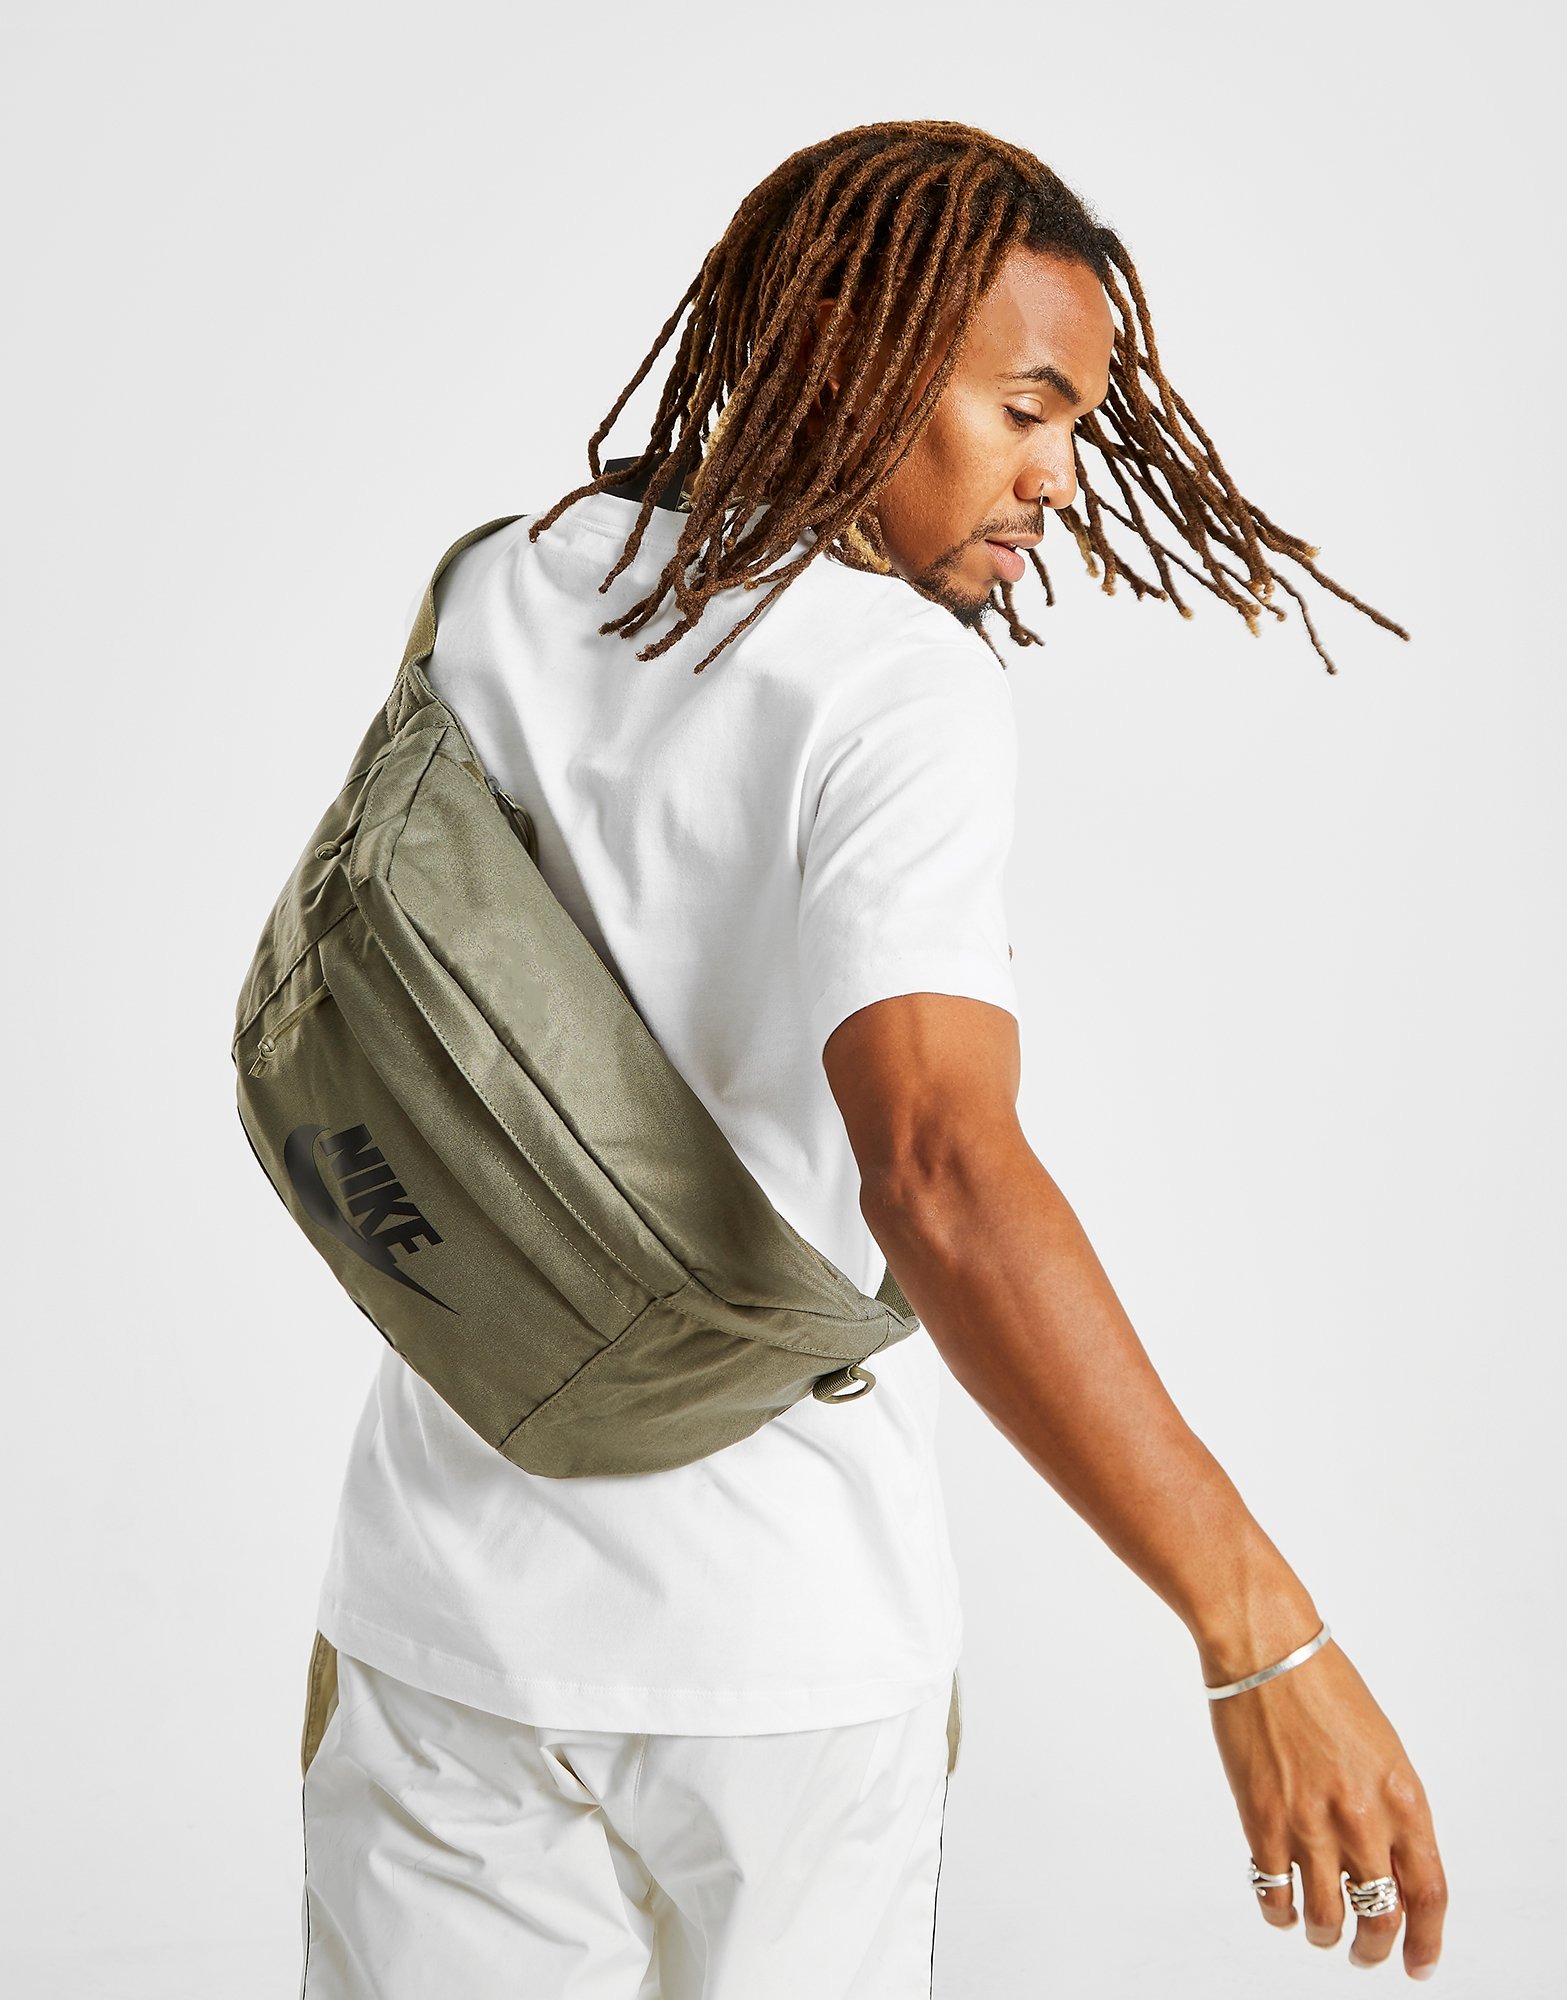 Men's Nike Belt Bags, waist bags and fanny packs from $24